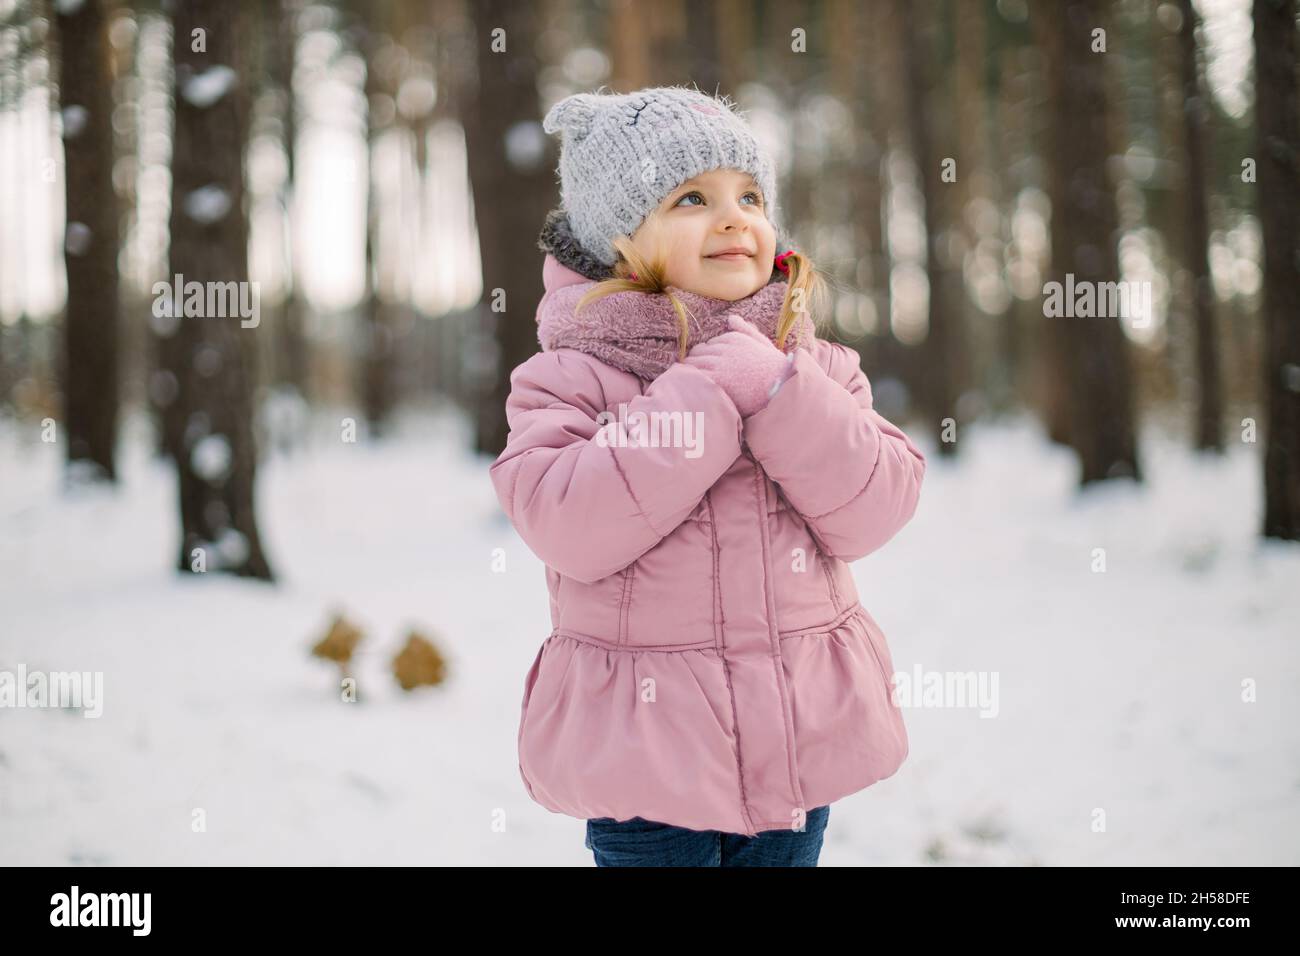 https://c8.alamy.com/comp/2H58DFE/dreamy-cute-little-girl-in-stylish-warm-winter-clothes-posing-outdoors-in-the-snowy-forest-and-looking-up-pretty-child-girl-in-pink-outfit-enjoying-winter-season-and-snow-in-the-nature-2H58DFE.jpg